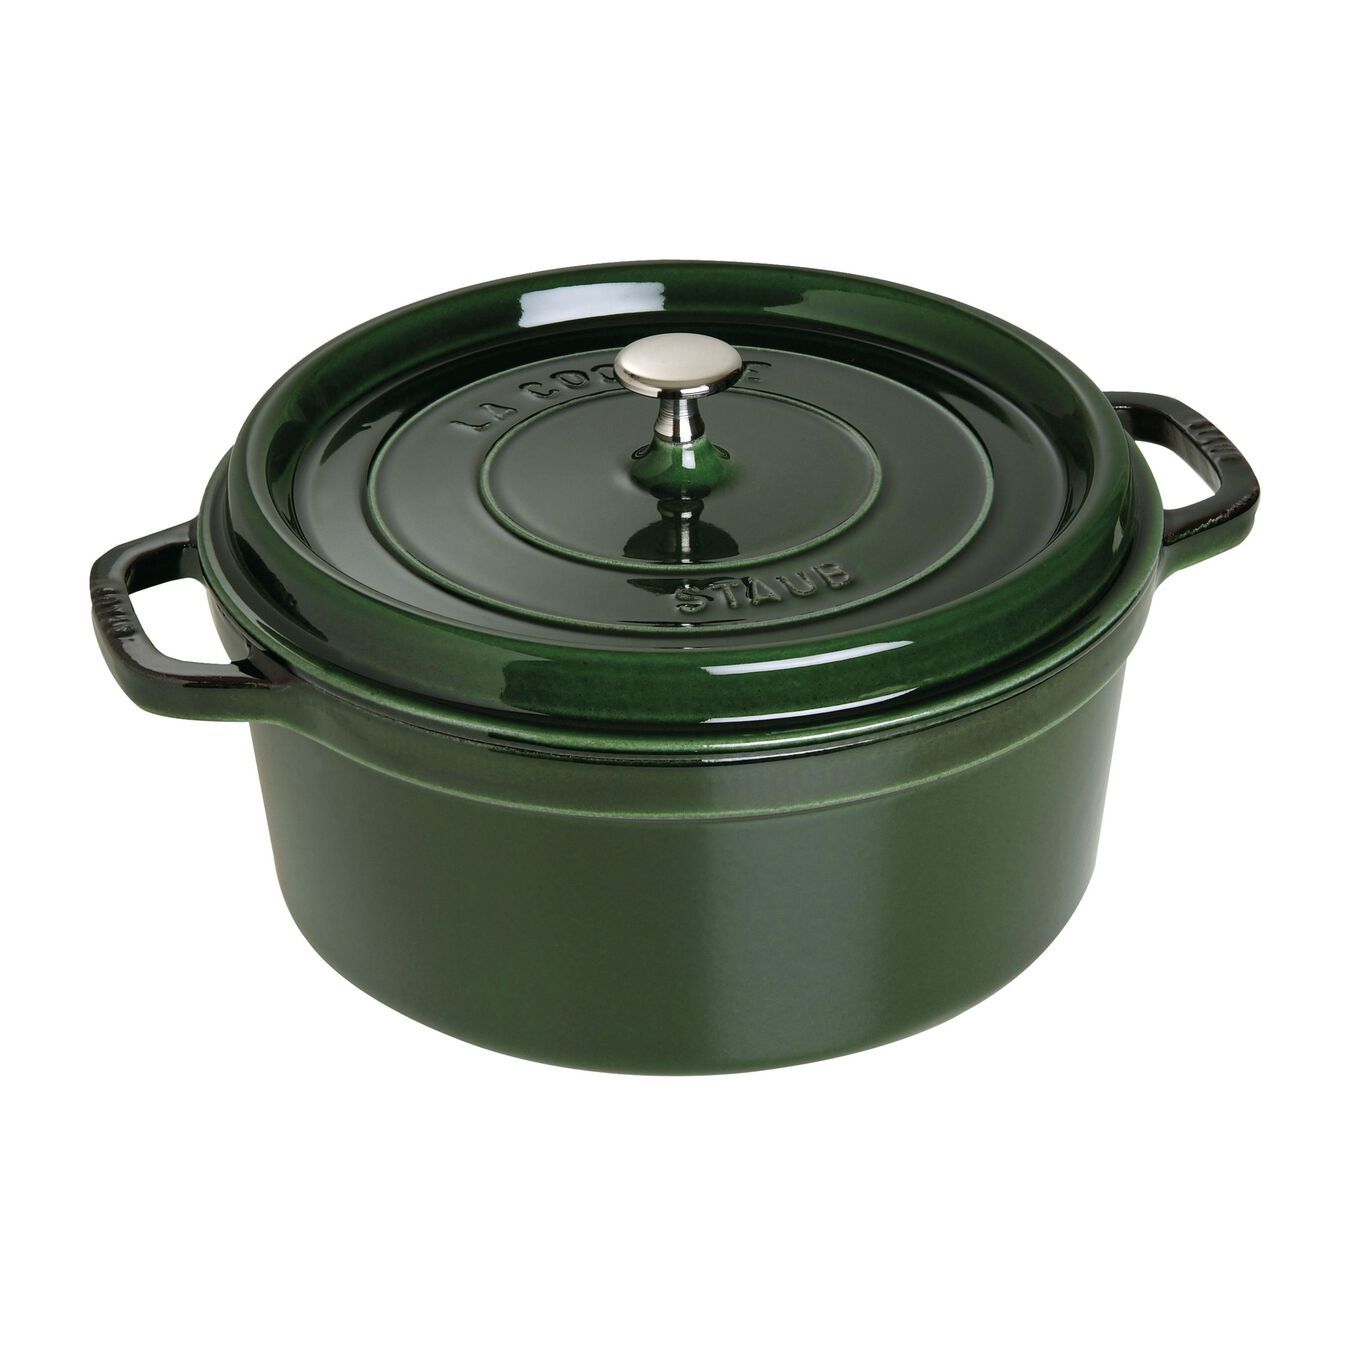 6.75 l cast iron round Cocotte, basil-green,,large 1